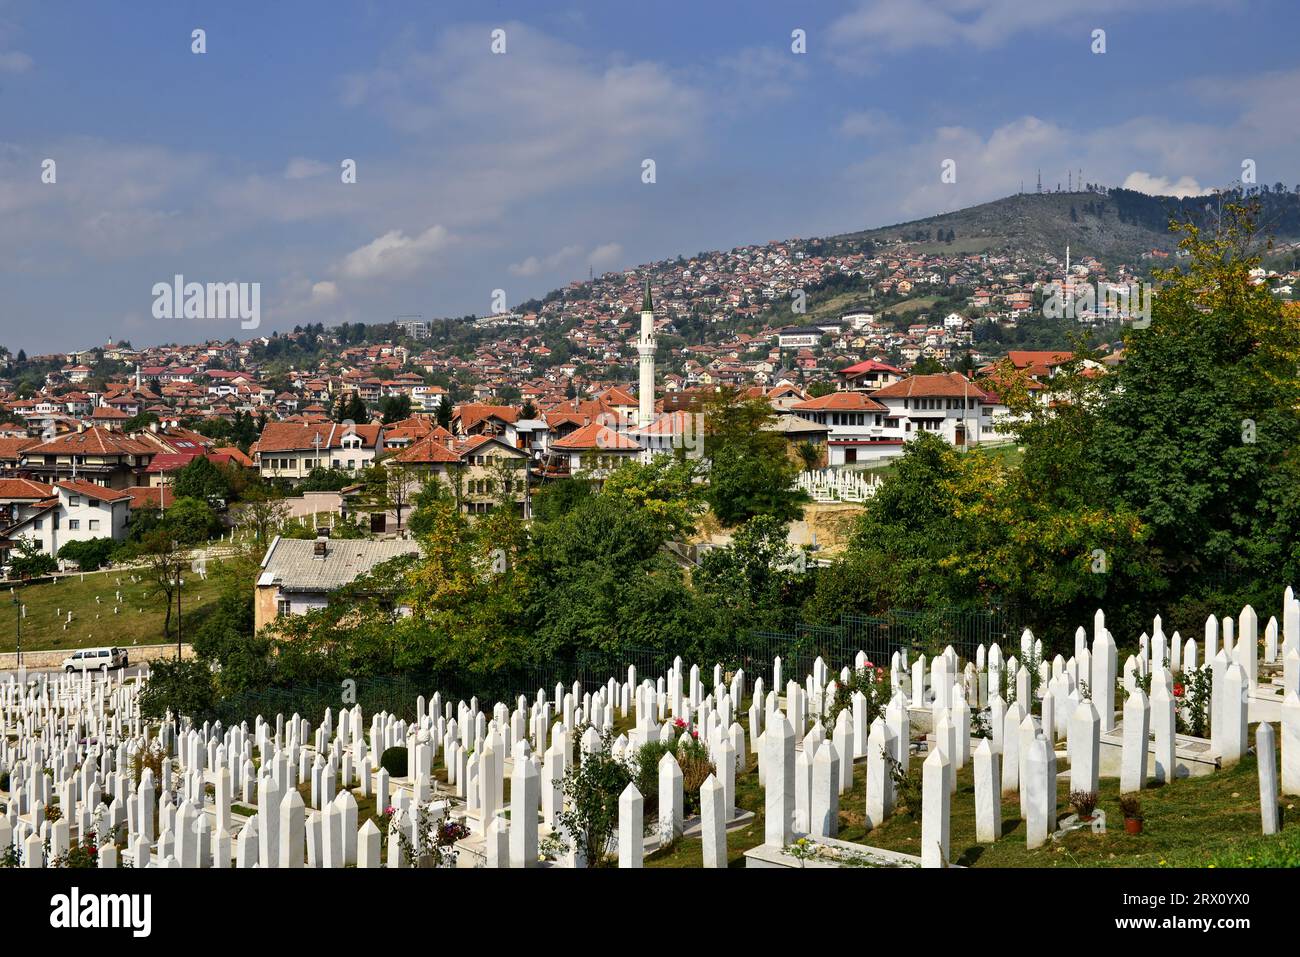 One of the many huge graveyards that dotted Sarajevo, Bosnia, where victims of the Bosnian War 1992-1995 were buried. RIP Stock Photo